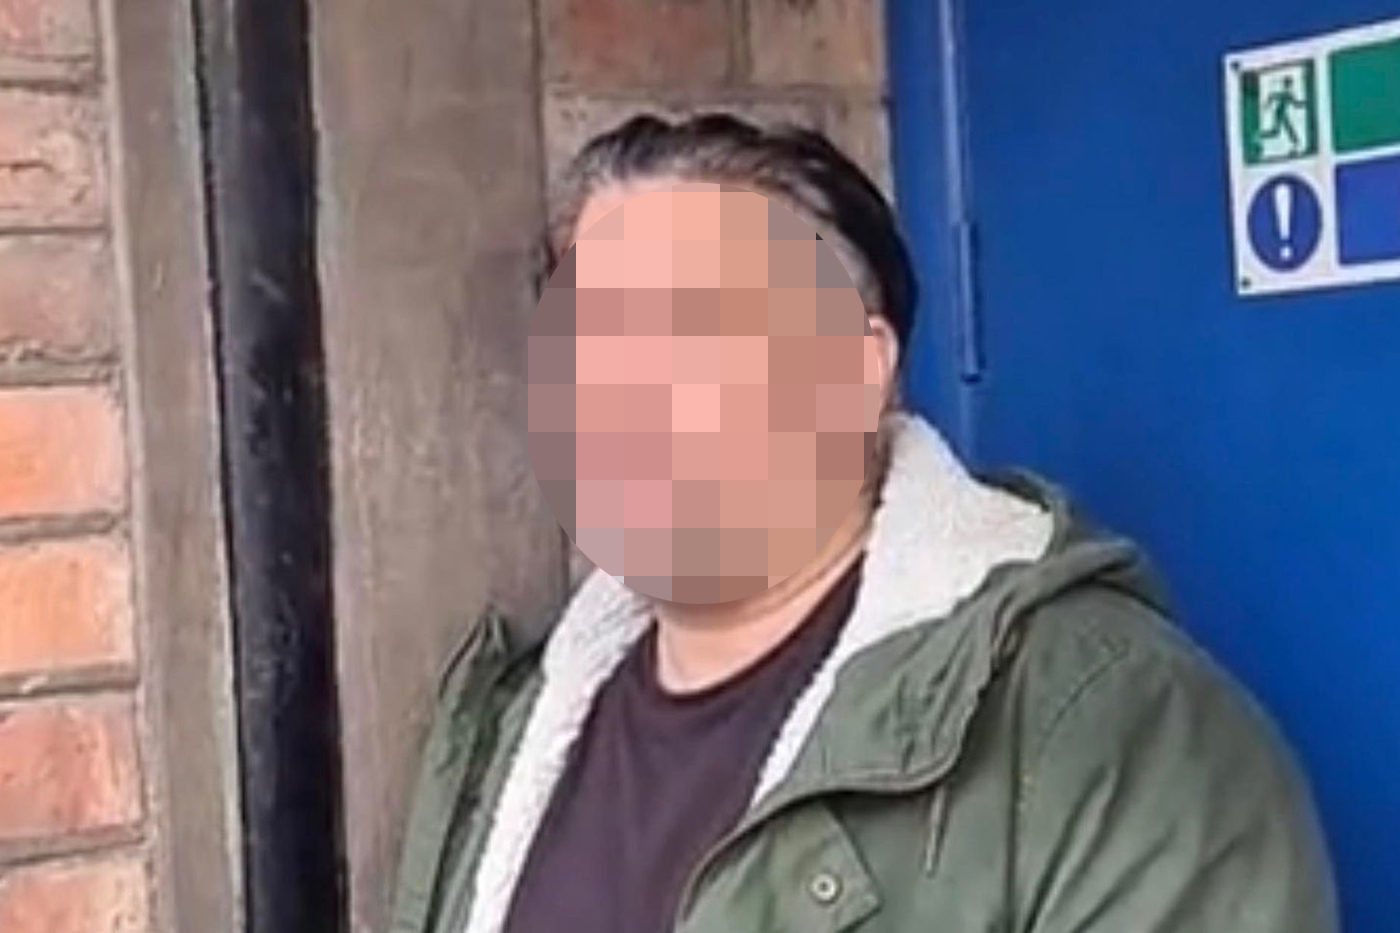 Police Arrest Man After Paedophile Hunters Conduct Sting At Swindon Pub